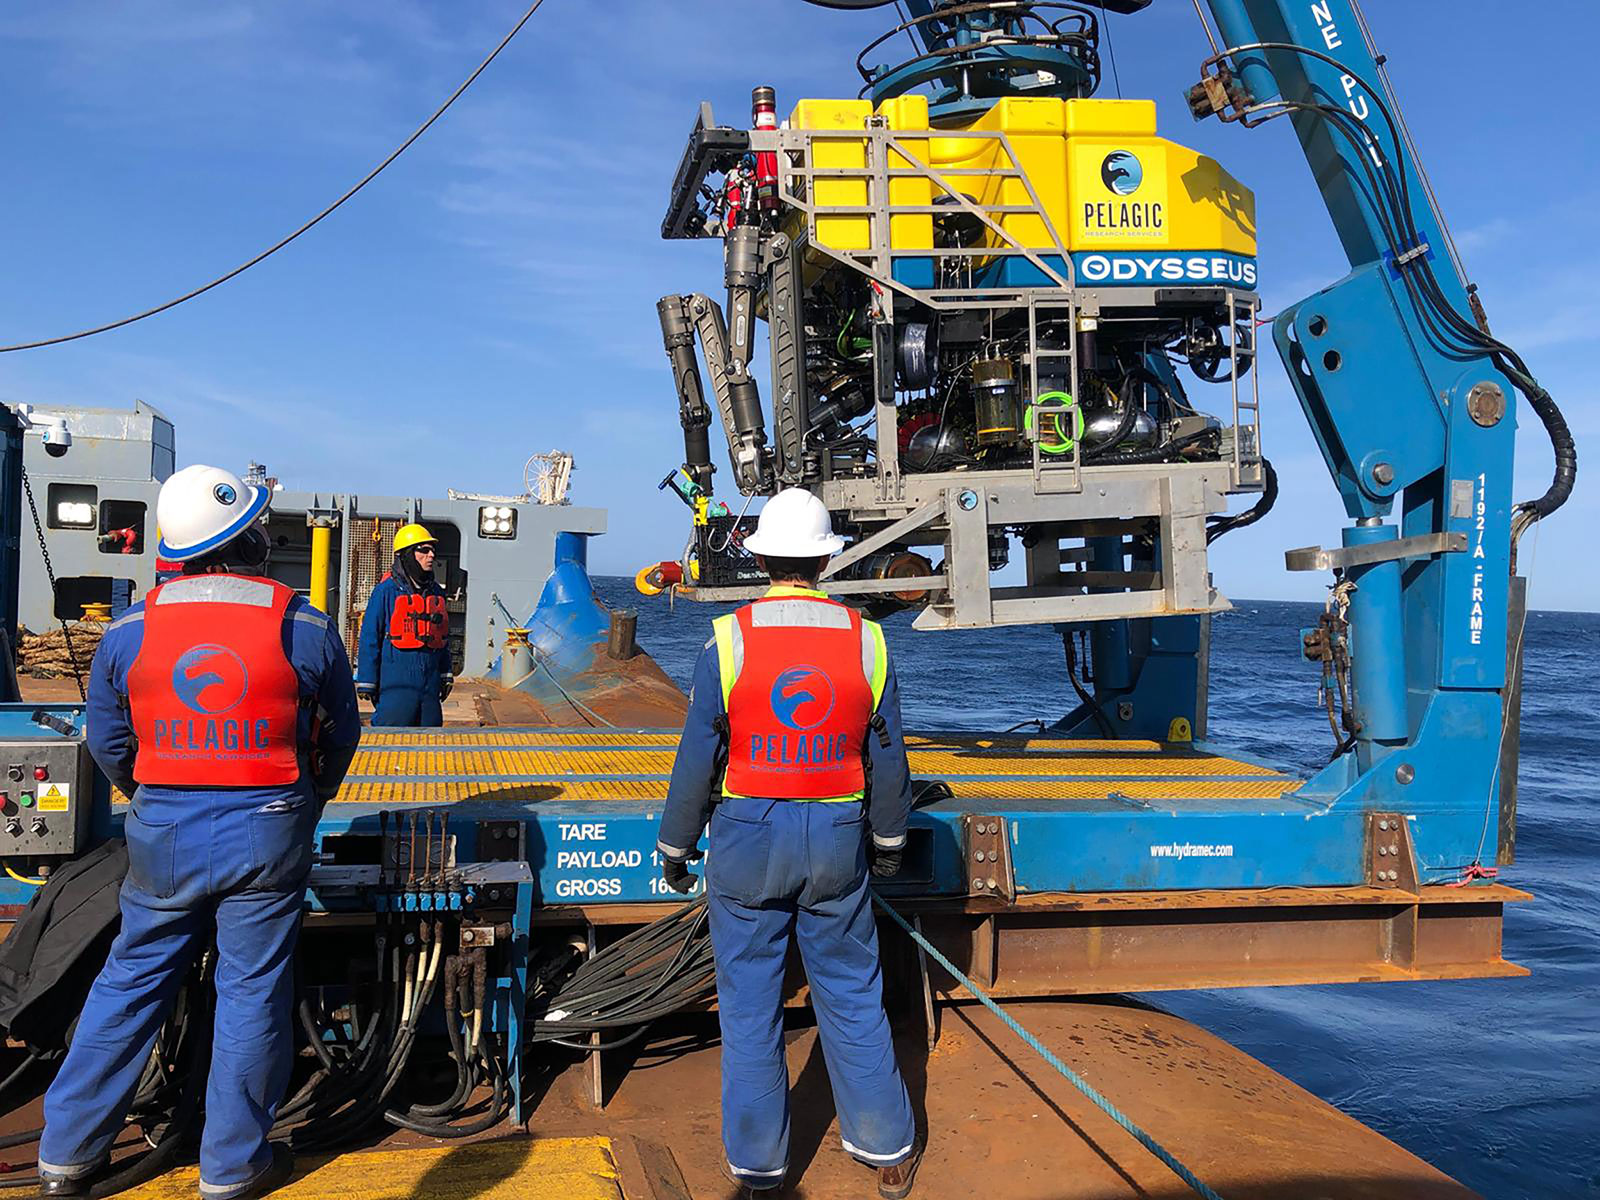 Pelagic's remotely operated conveyance  Odysseus 6 is lifted retired  of the water  aft  searching for debris from the Titan submersible connected  June 22.